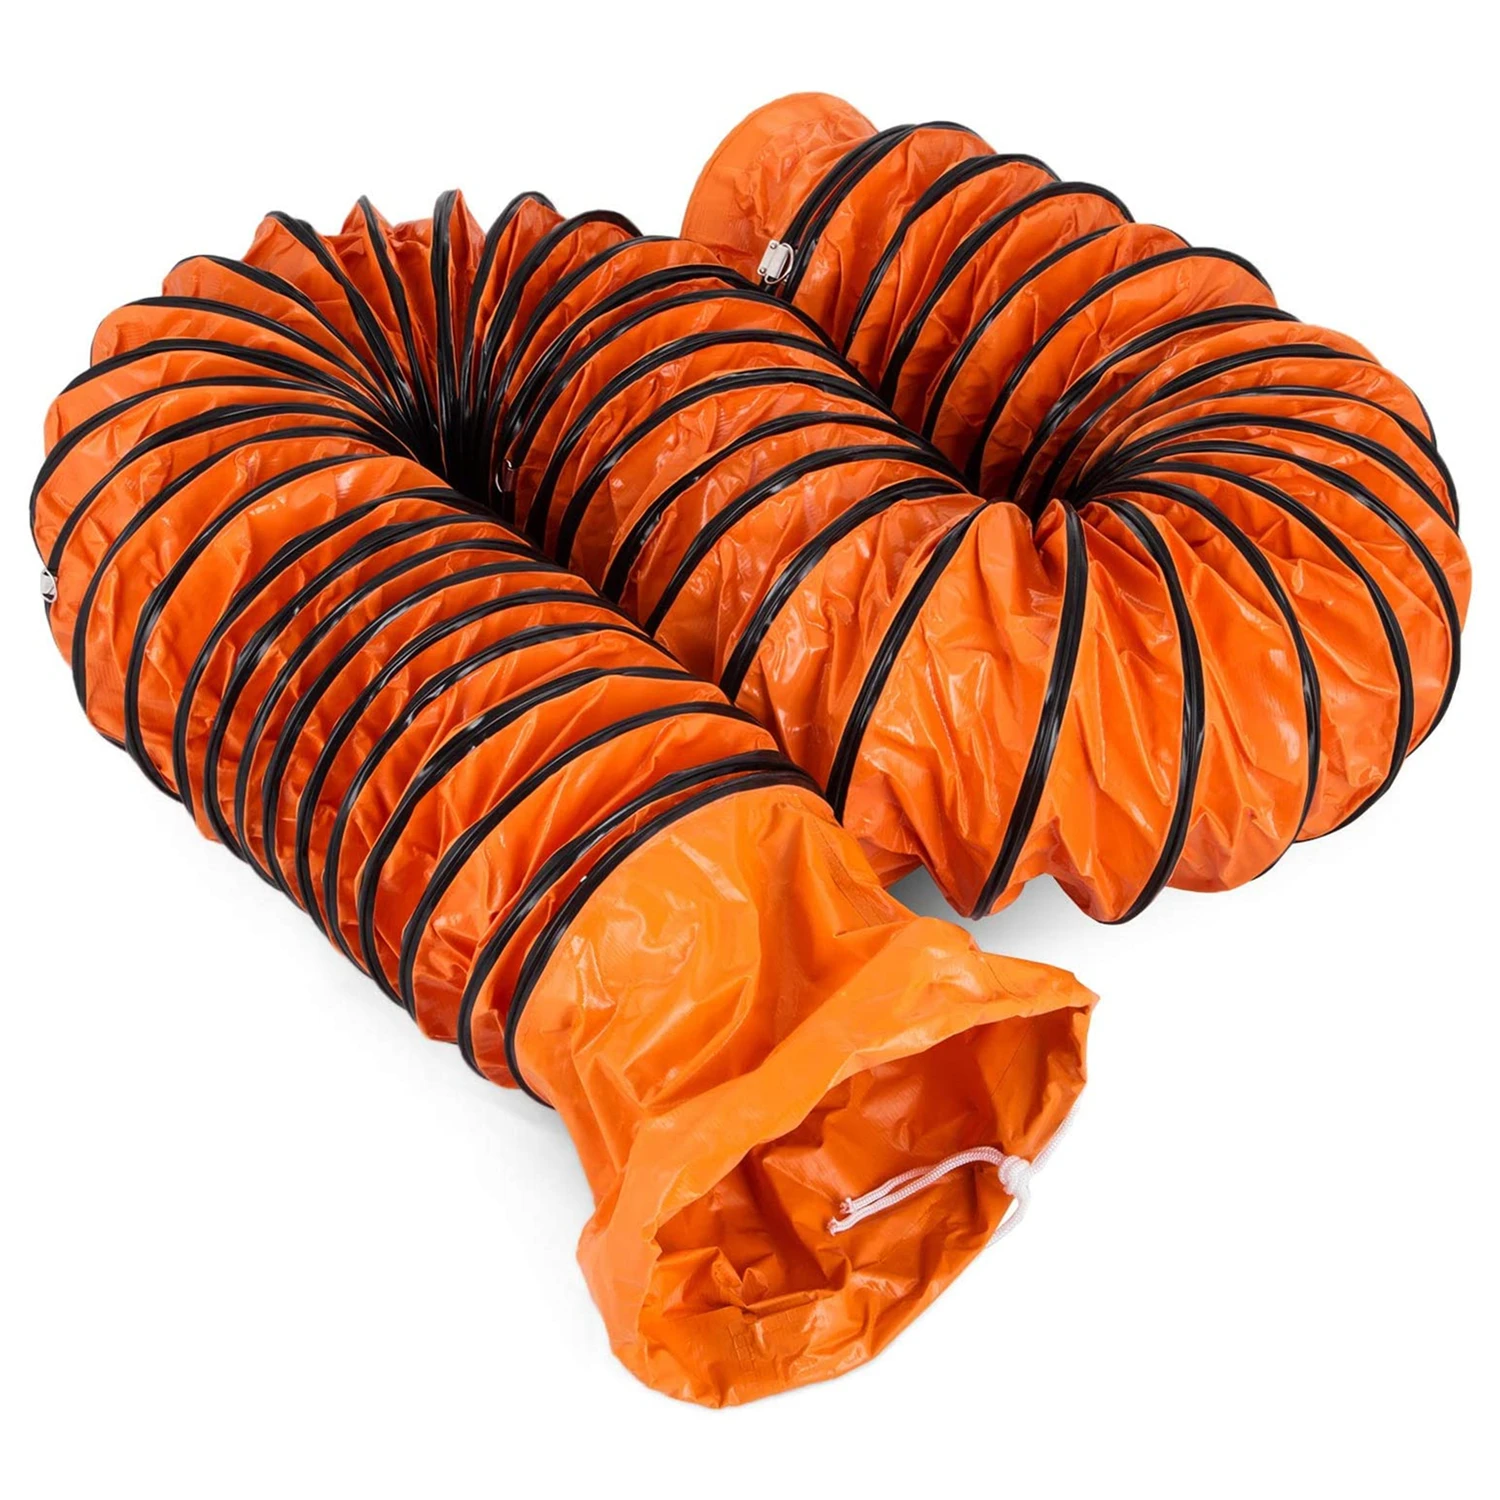 8 inch hvac insulated flexible duct pipe exhaust pvc flexible duct hose flexible flame retardant fabric air duct